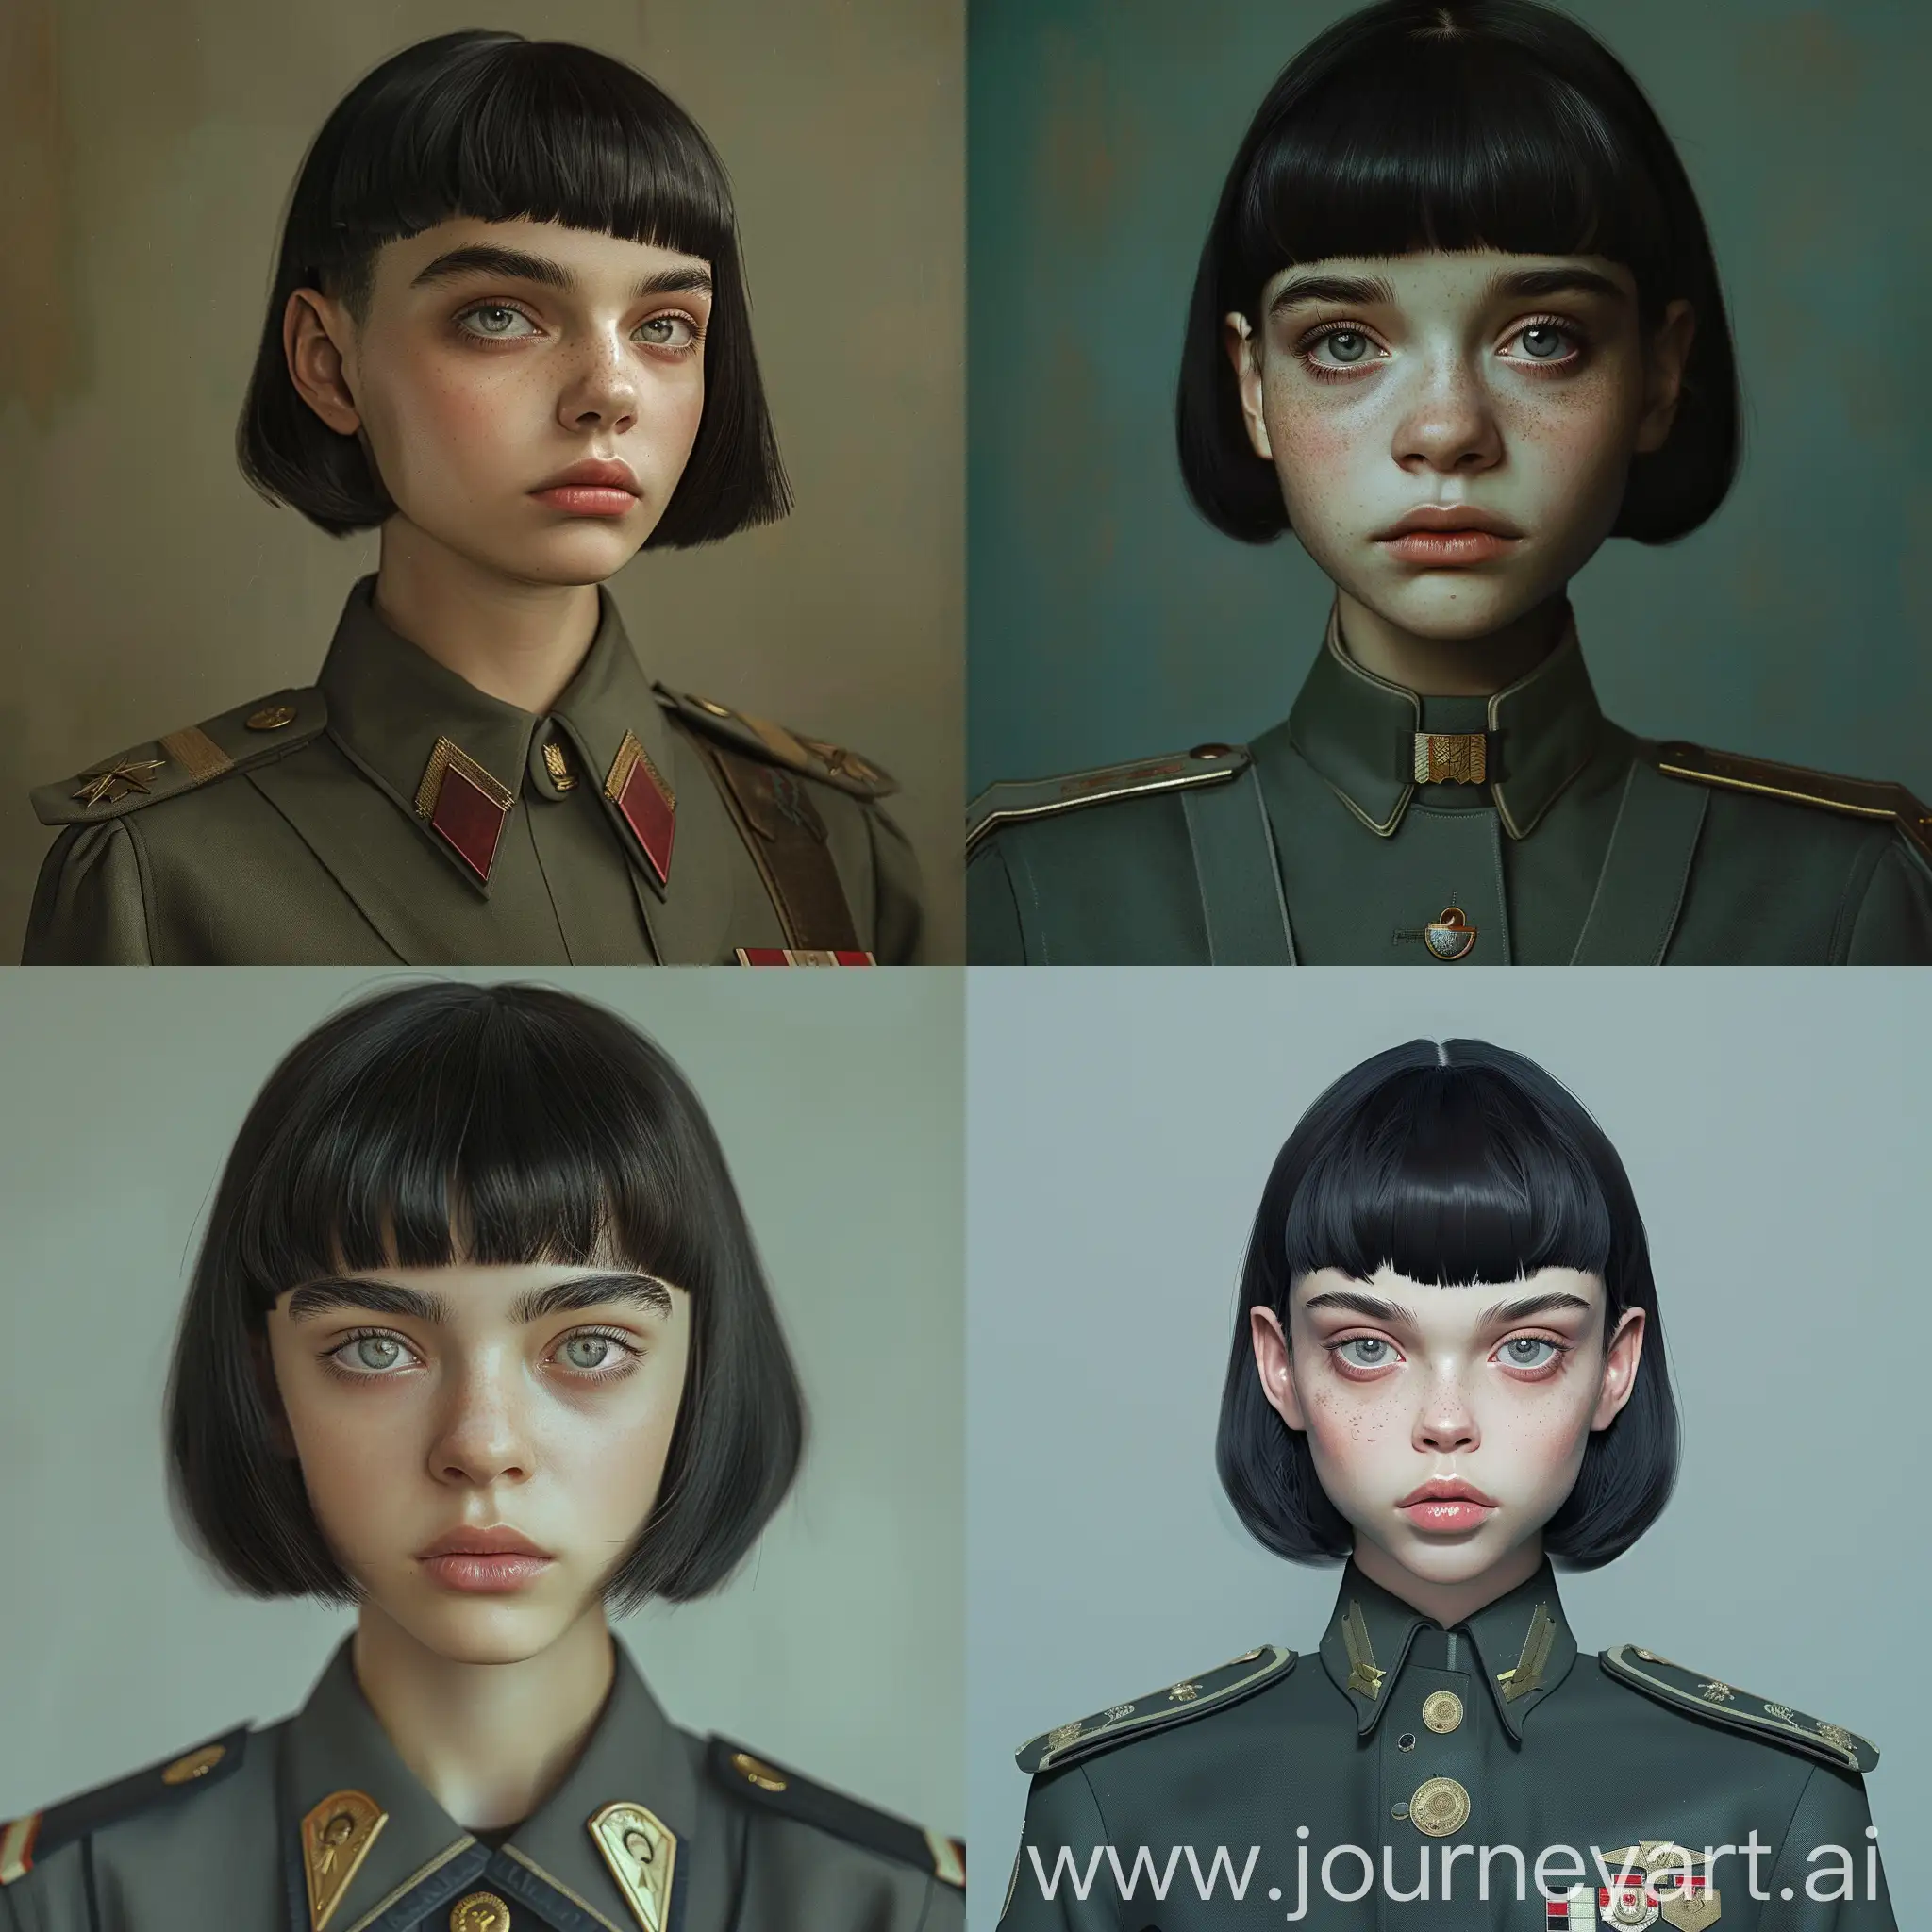 Portrait-of-a-16YearOld-Girl-in-SemiMilitary-Academy-Uniform